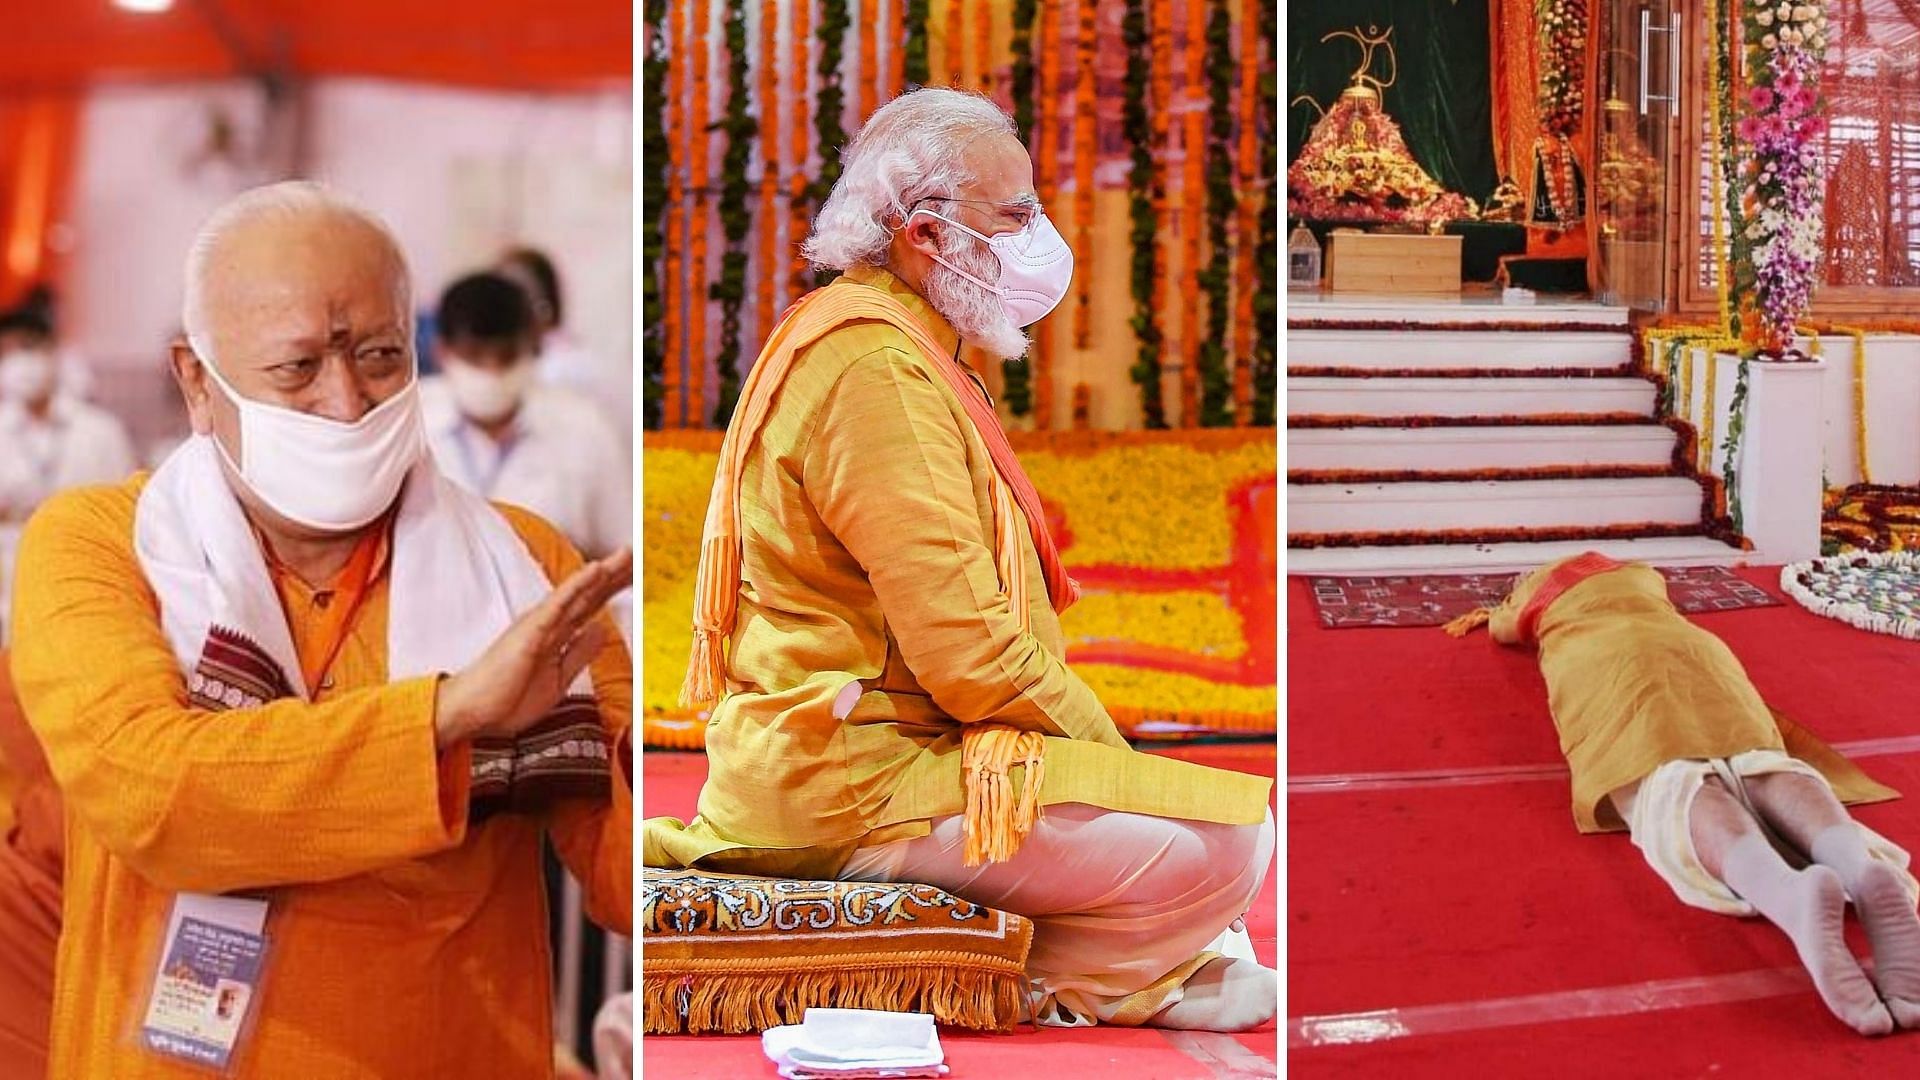 PM Modi performed ‘<a href="https://www.thequint.com/news/india/ayodhya-case-verdict-final-supreme-court-verdict-on-ram-mandir-babri-masjid-dispute">Bhoomi Poojan</a>’ for the Ram Temple and lay a 40-kg silver brick on to the ground.